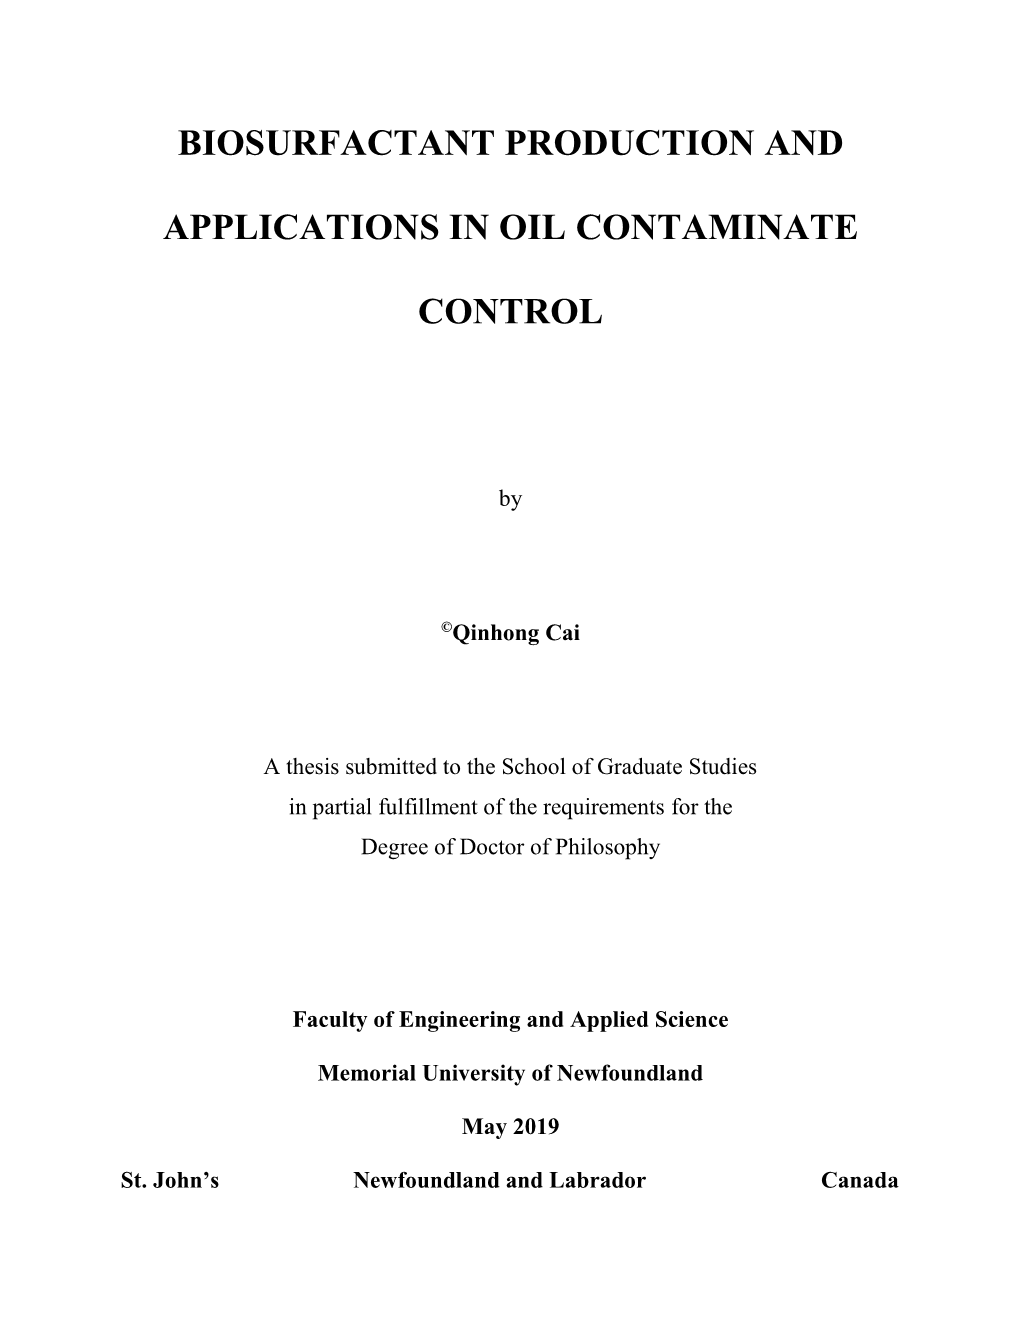 Biosurfactant Production and Applications in Oil